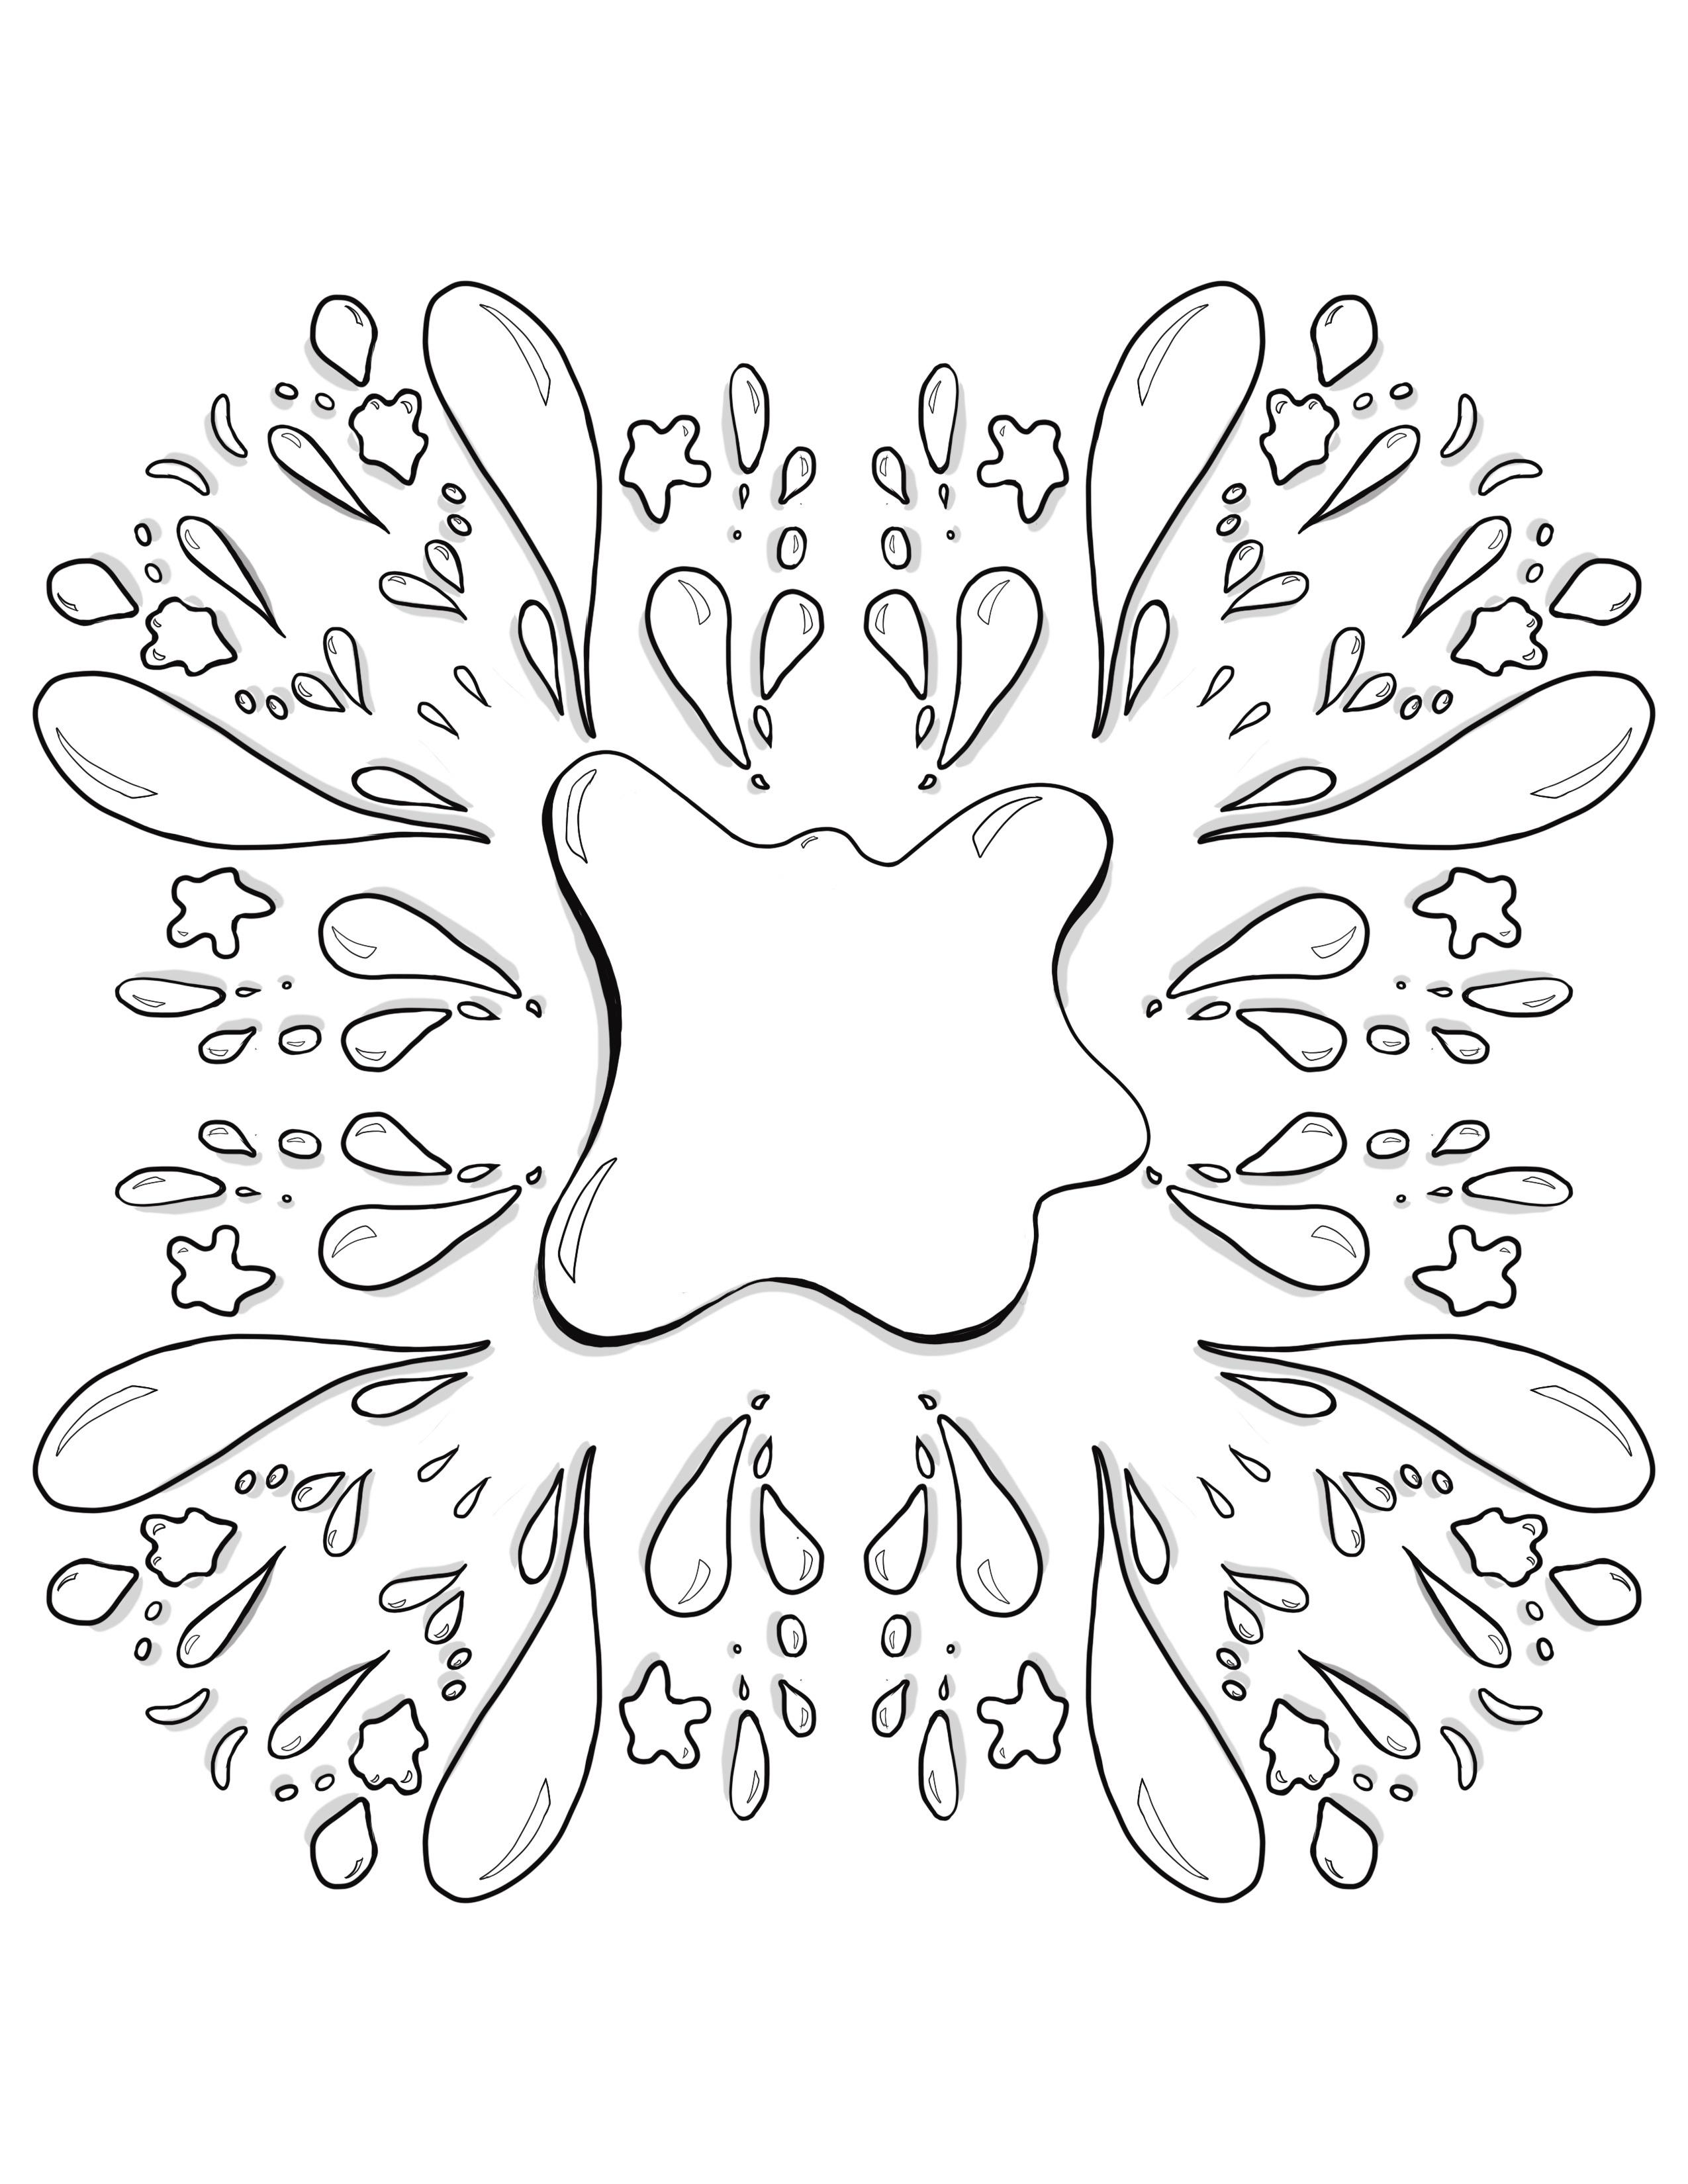 Ive been learning how to draw coloring pages what do you think of this one printable link in ments rcoloring